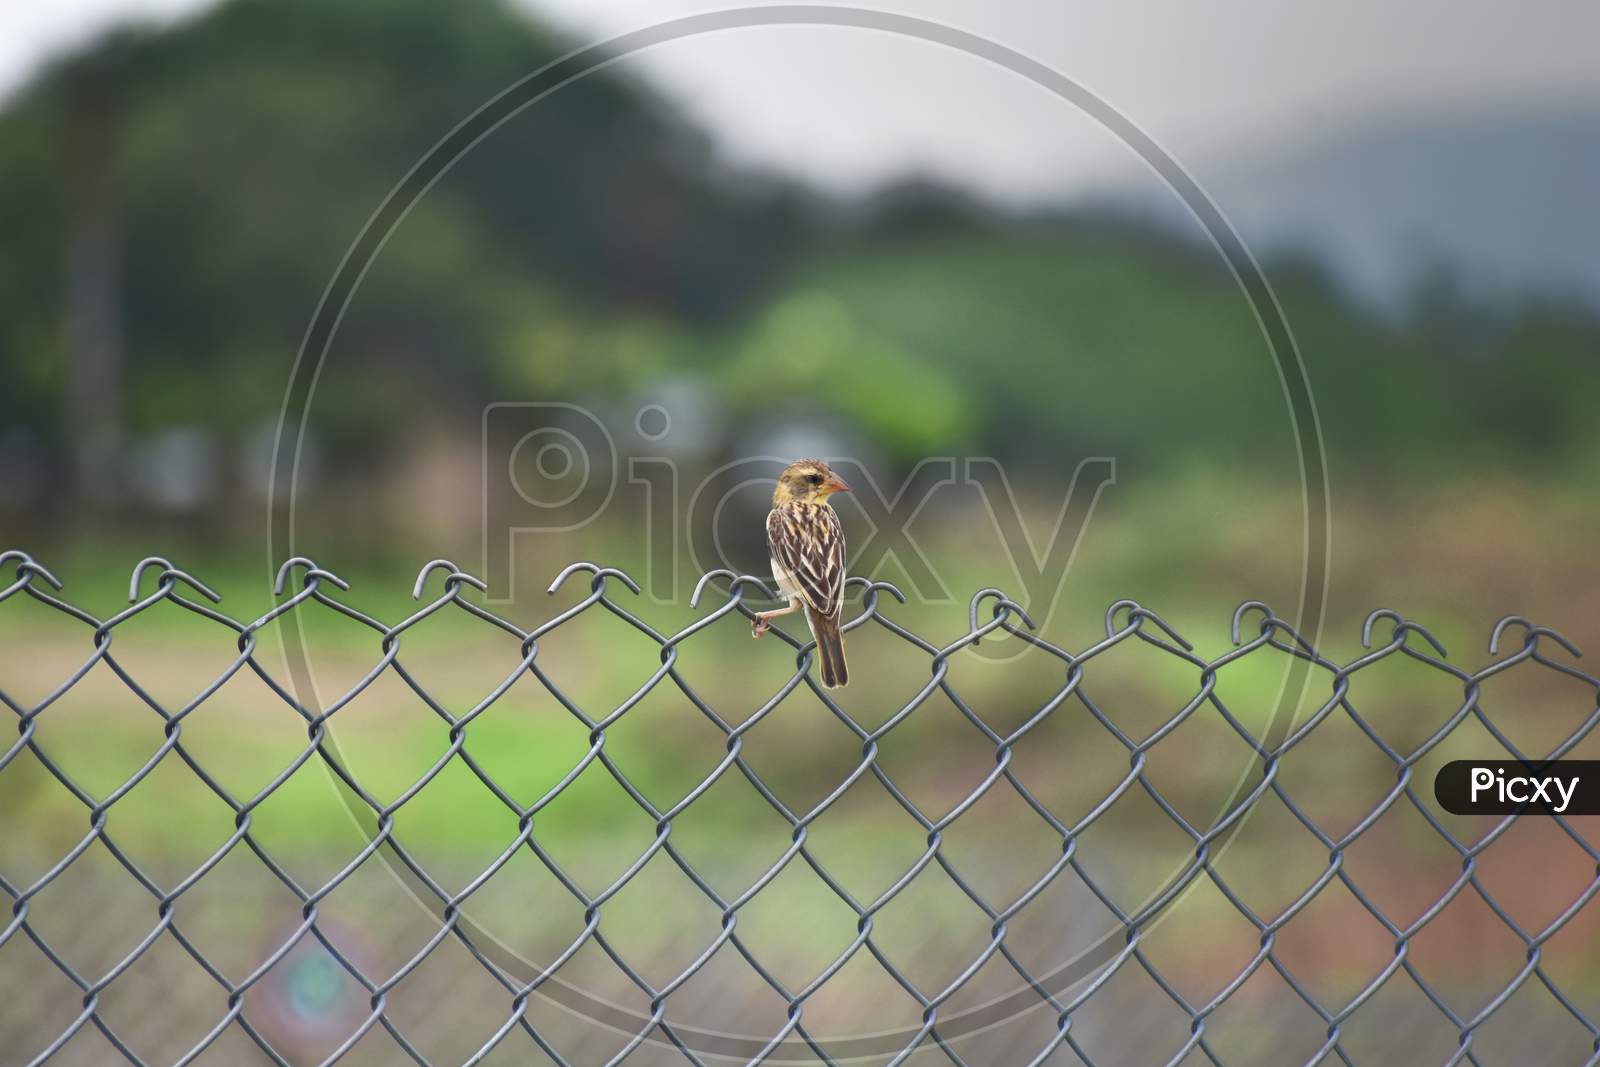 One Sparrow sitting on fence